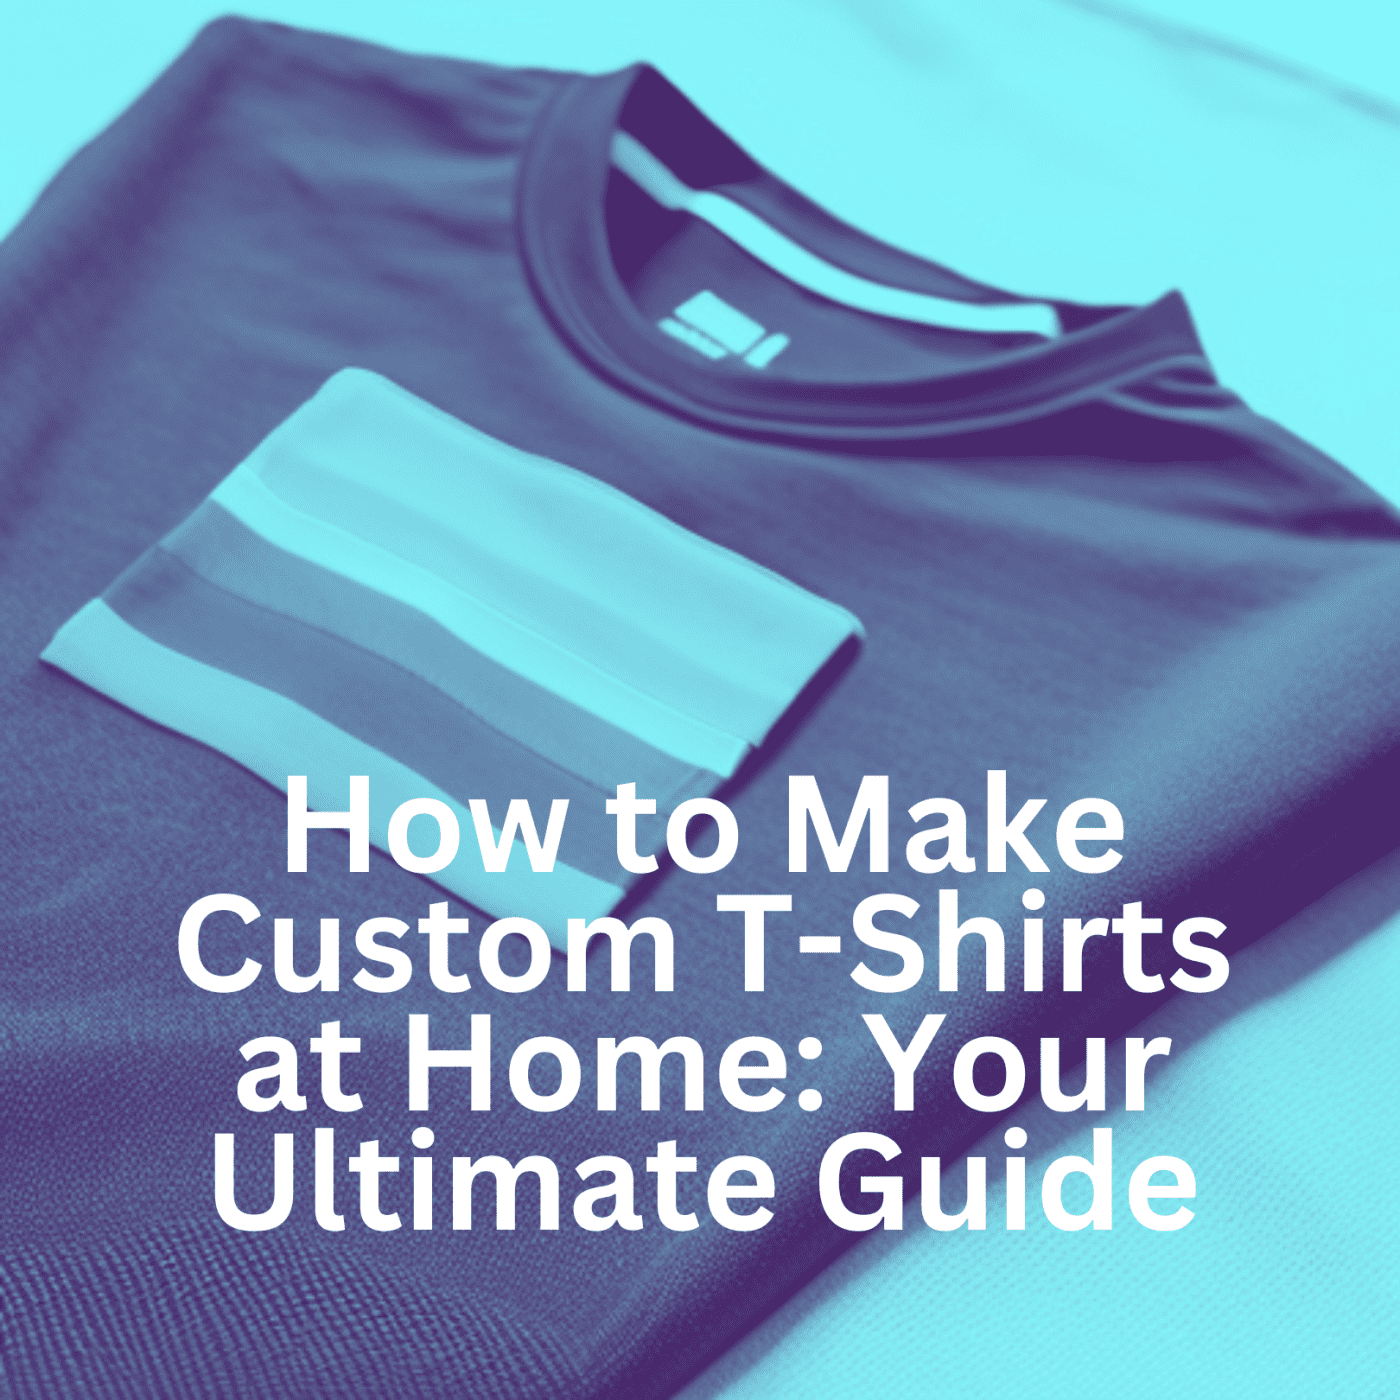 How to Make Custom T-Shirts at Home: Your Ultimate Guide